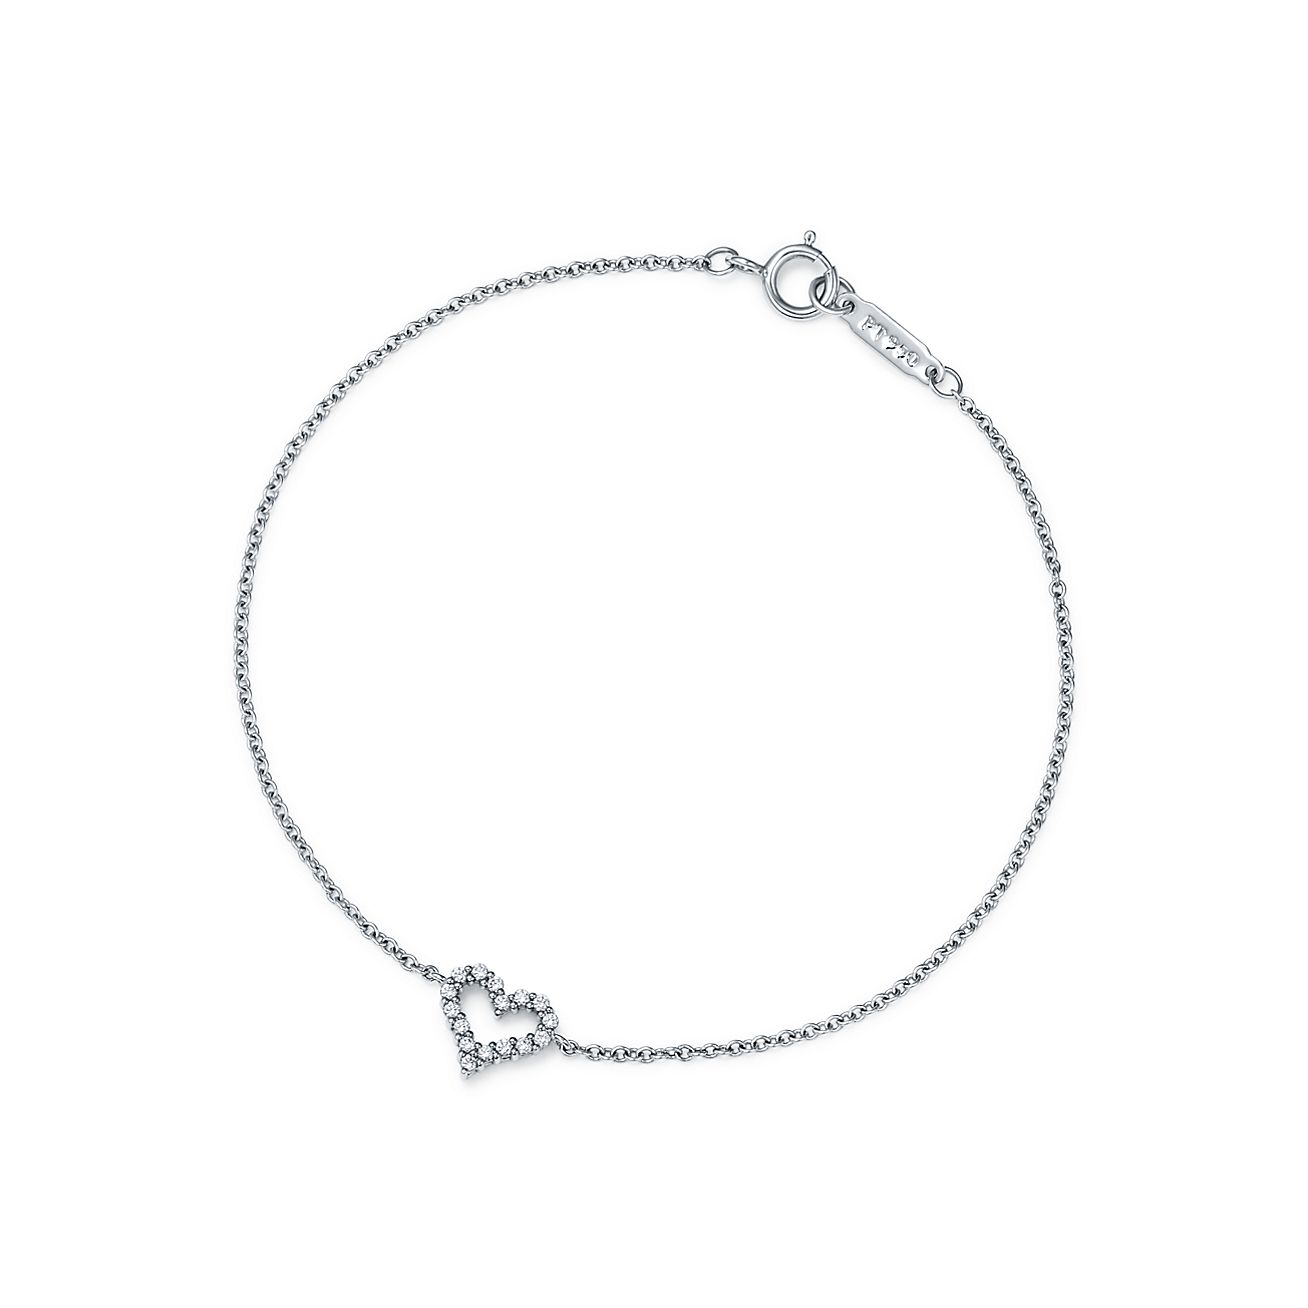 Heart bracelet in platinum with 